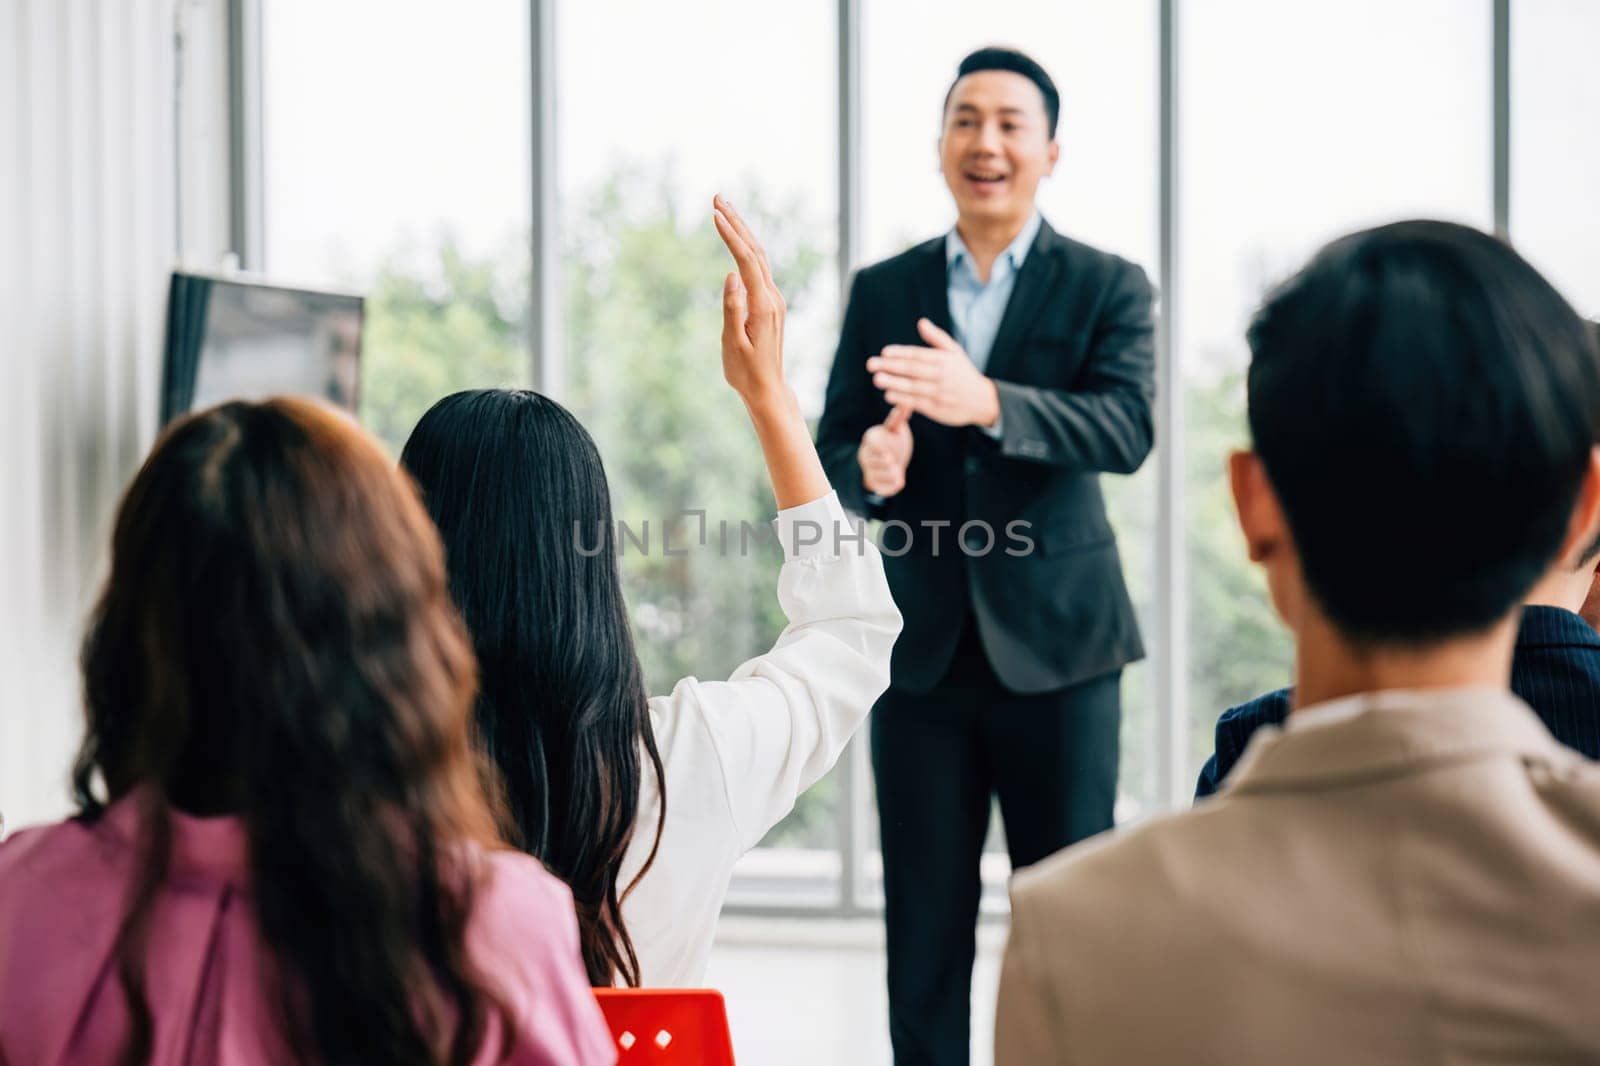 During a conference, a diverse crowd of businesspeople raises their hands to ask questions, vote, or volunteer. This scene emphasizes teamwork and active audience involvement by Sorapop